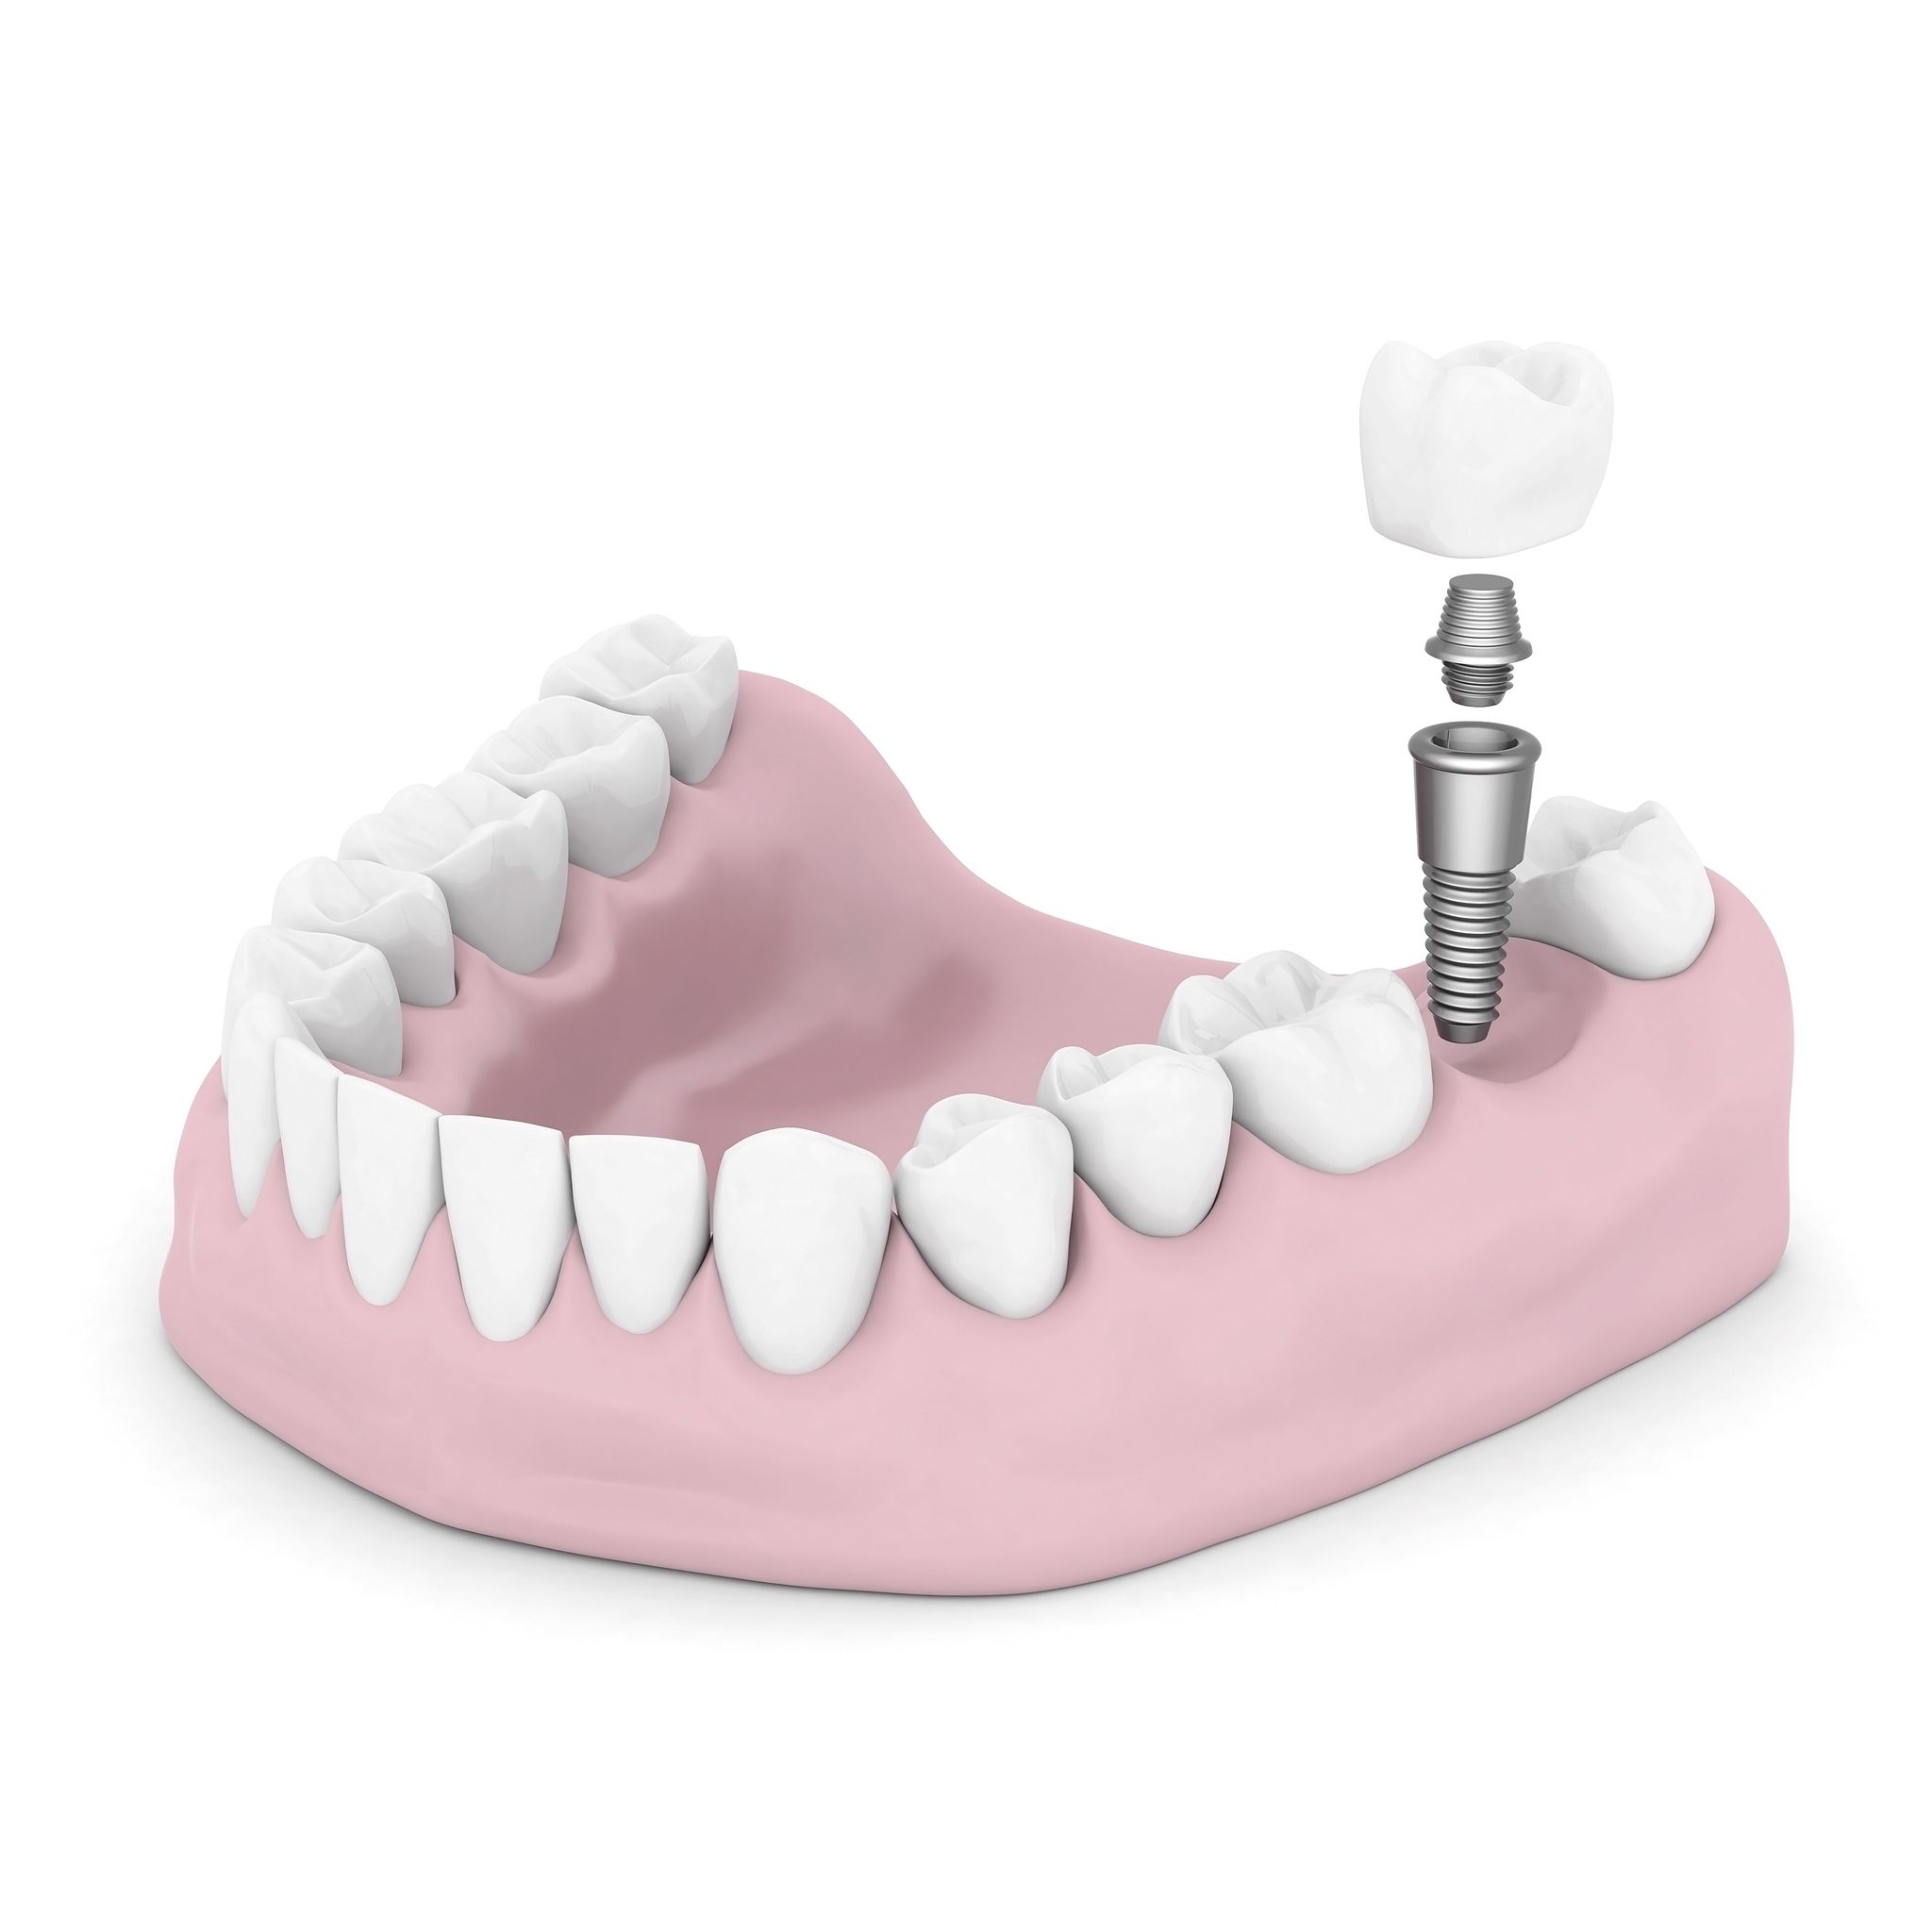 Where can I find Dental Implants in Costa Mesa?